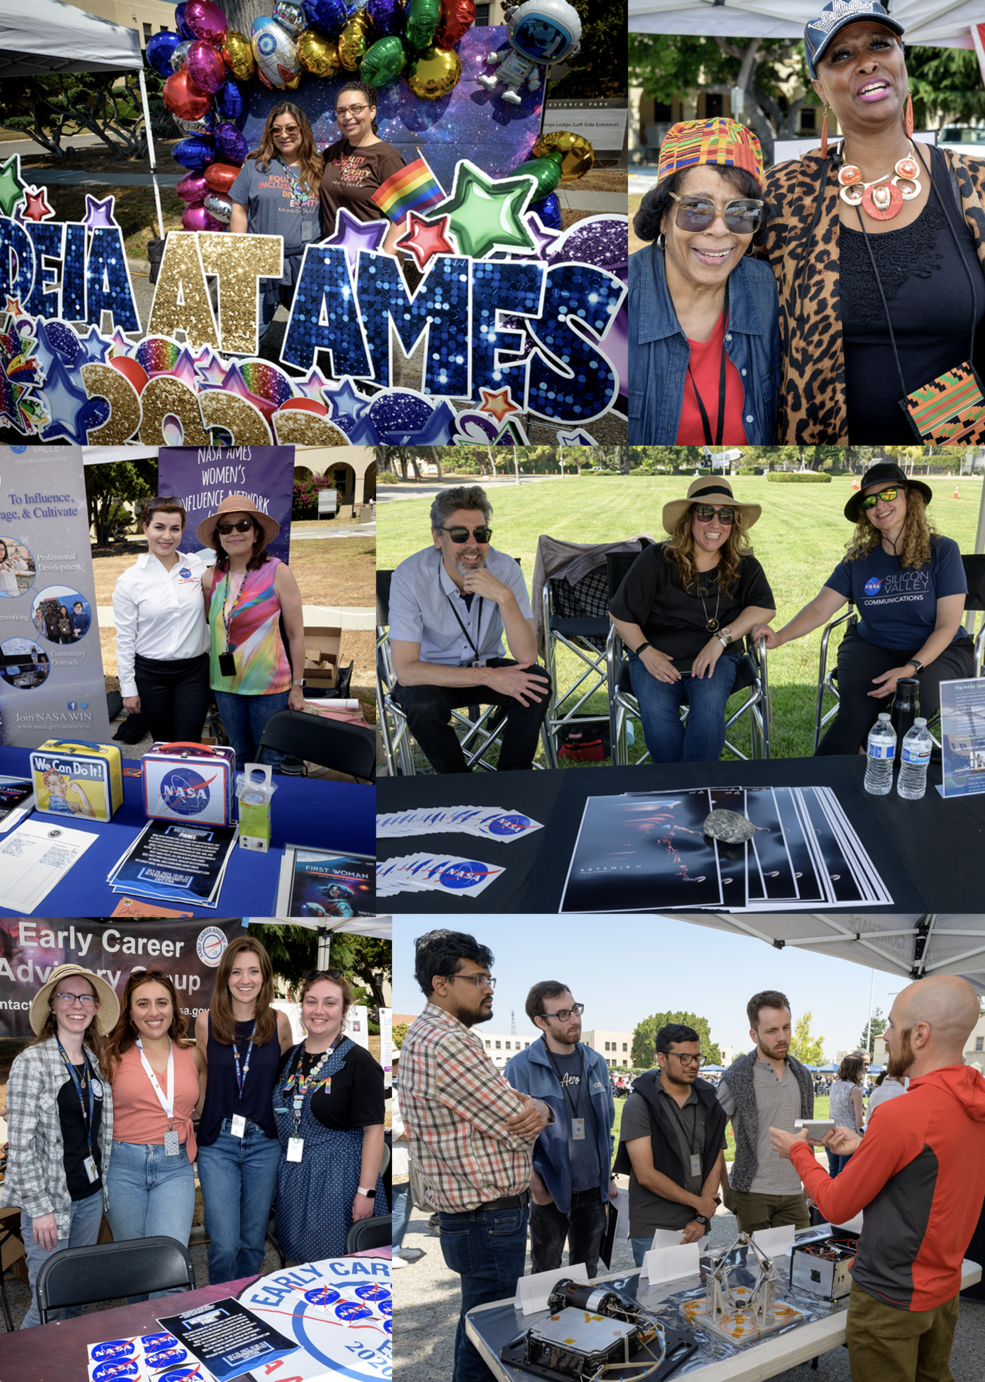 A third collage of pictures from the Ames summer picnic